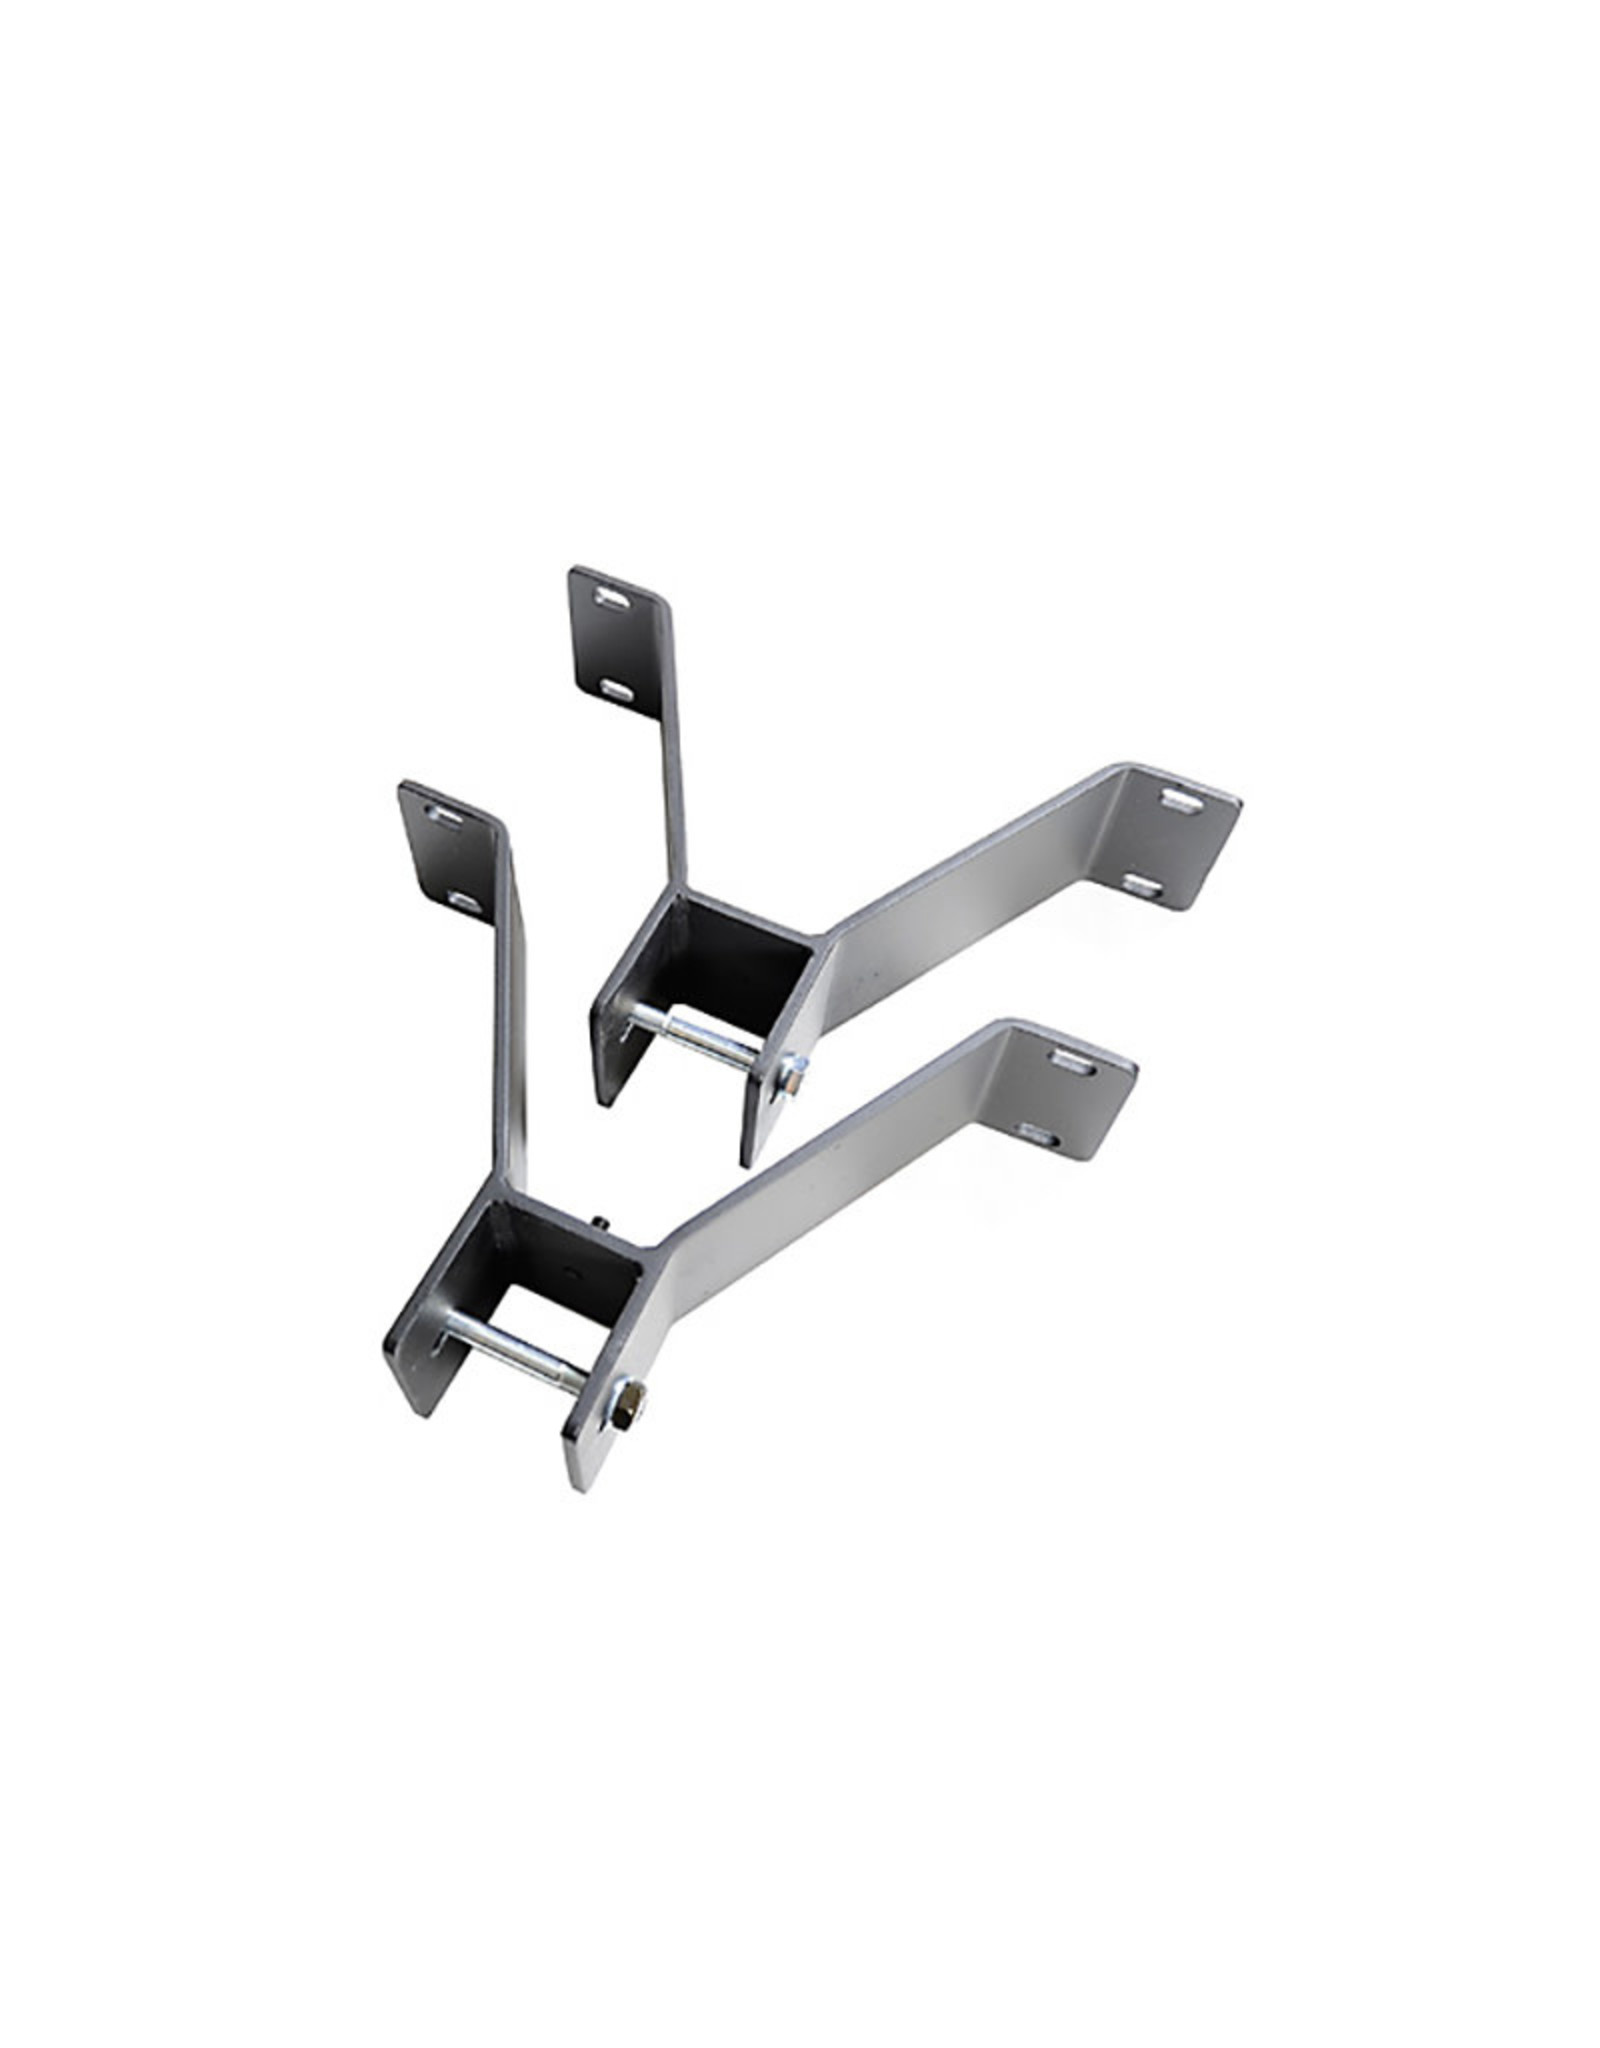 Cambo Cambo RPS-170 Set of Wall-mounting Brackets for RPS-100